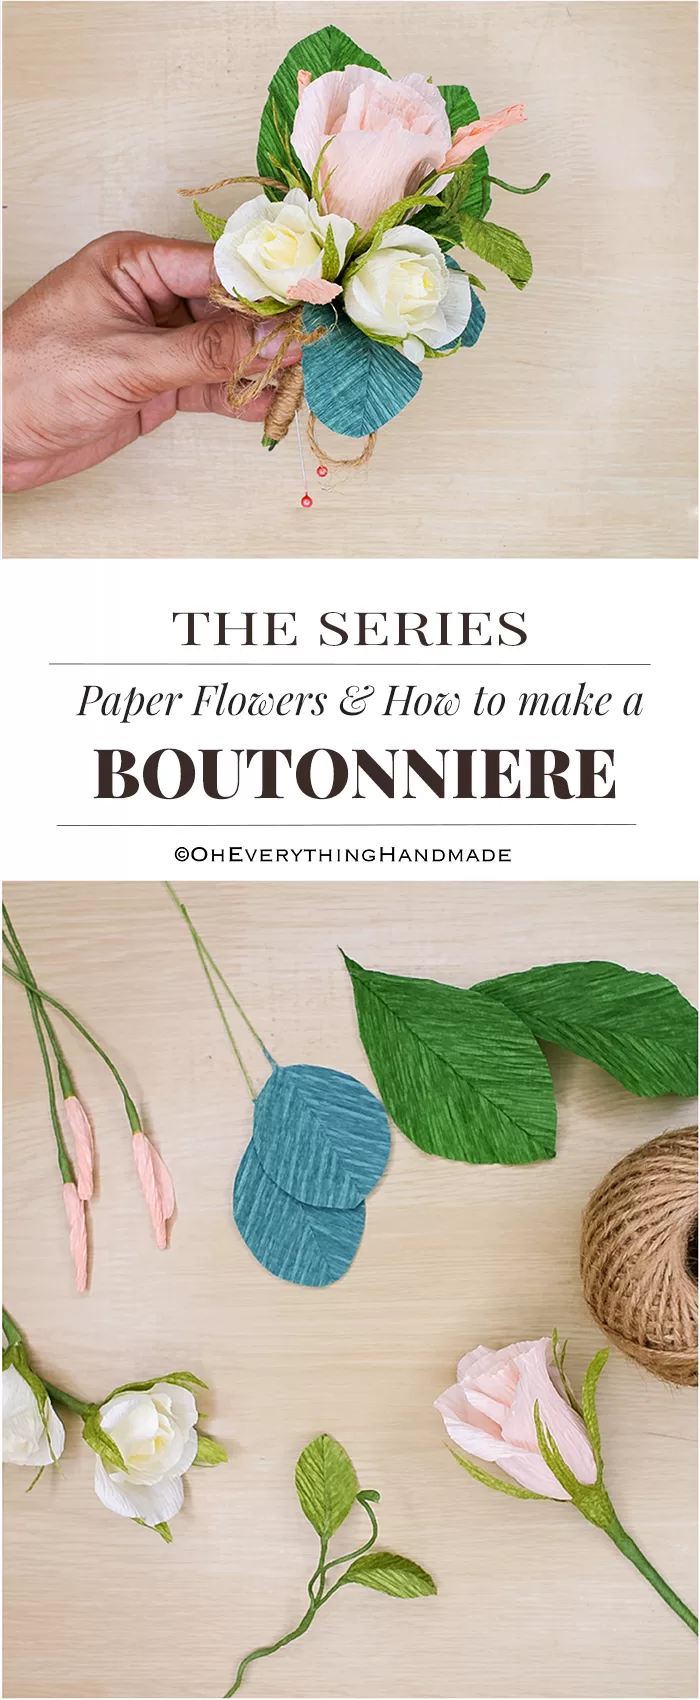 Paper Flowers & How to make Boutonnieres- PinMe